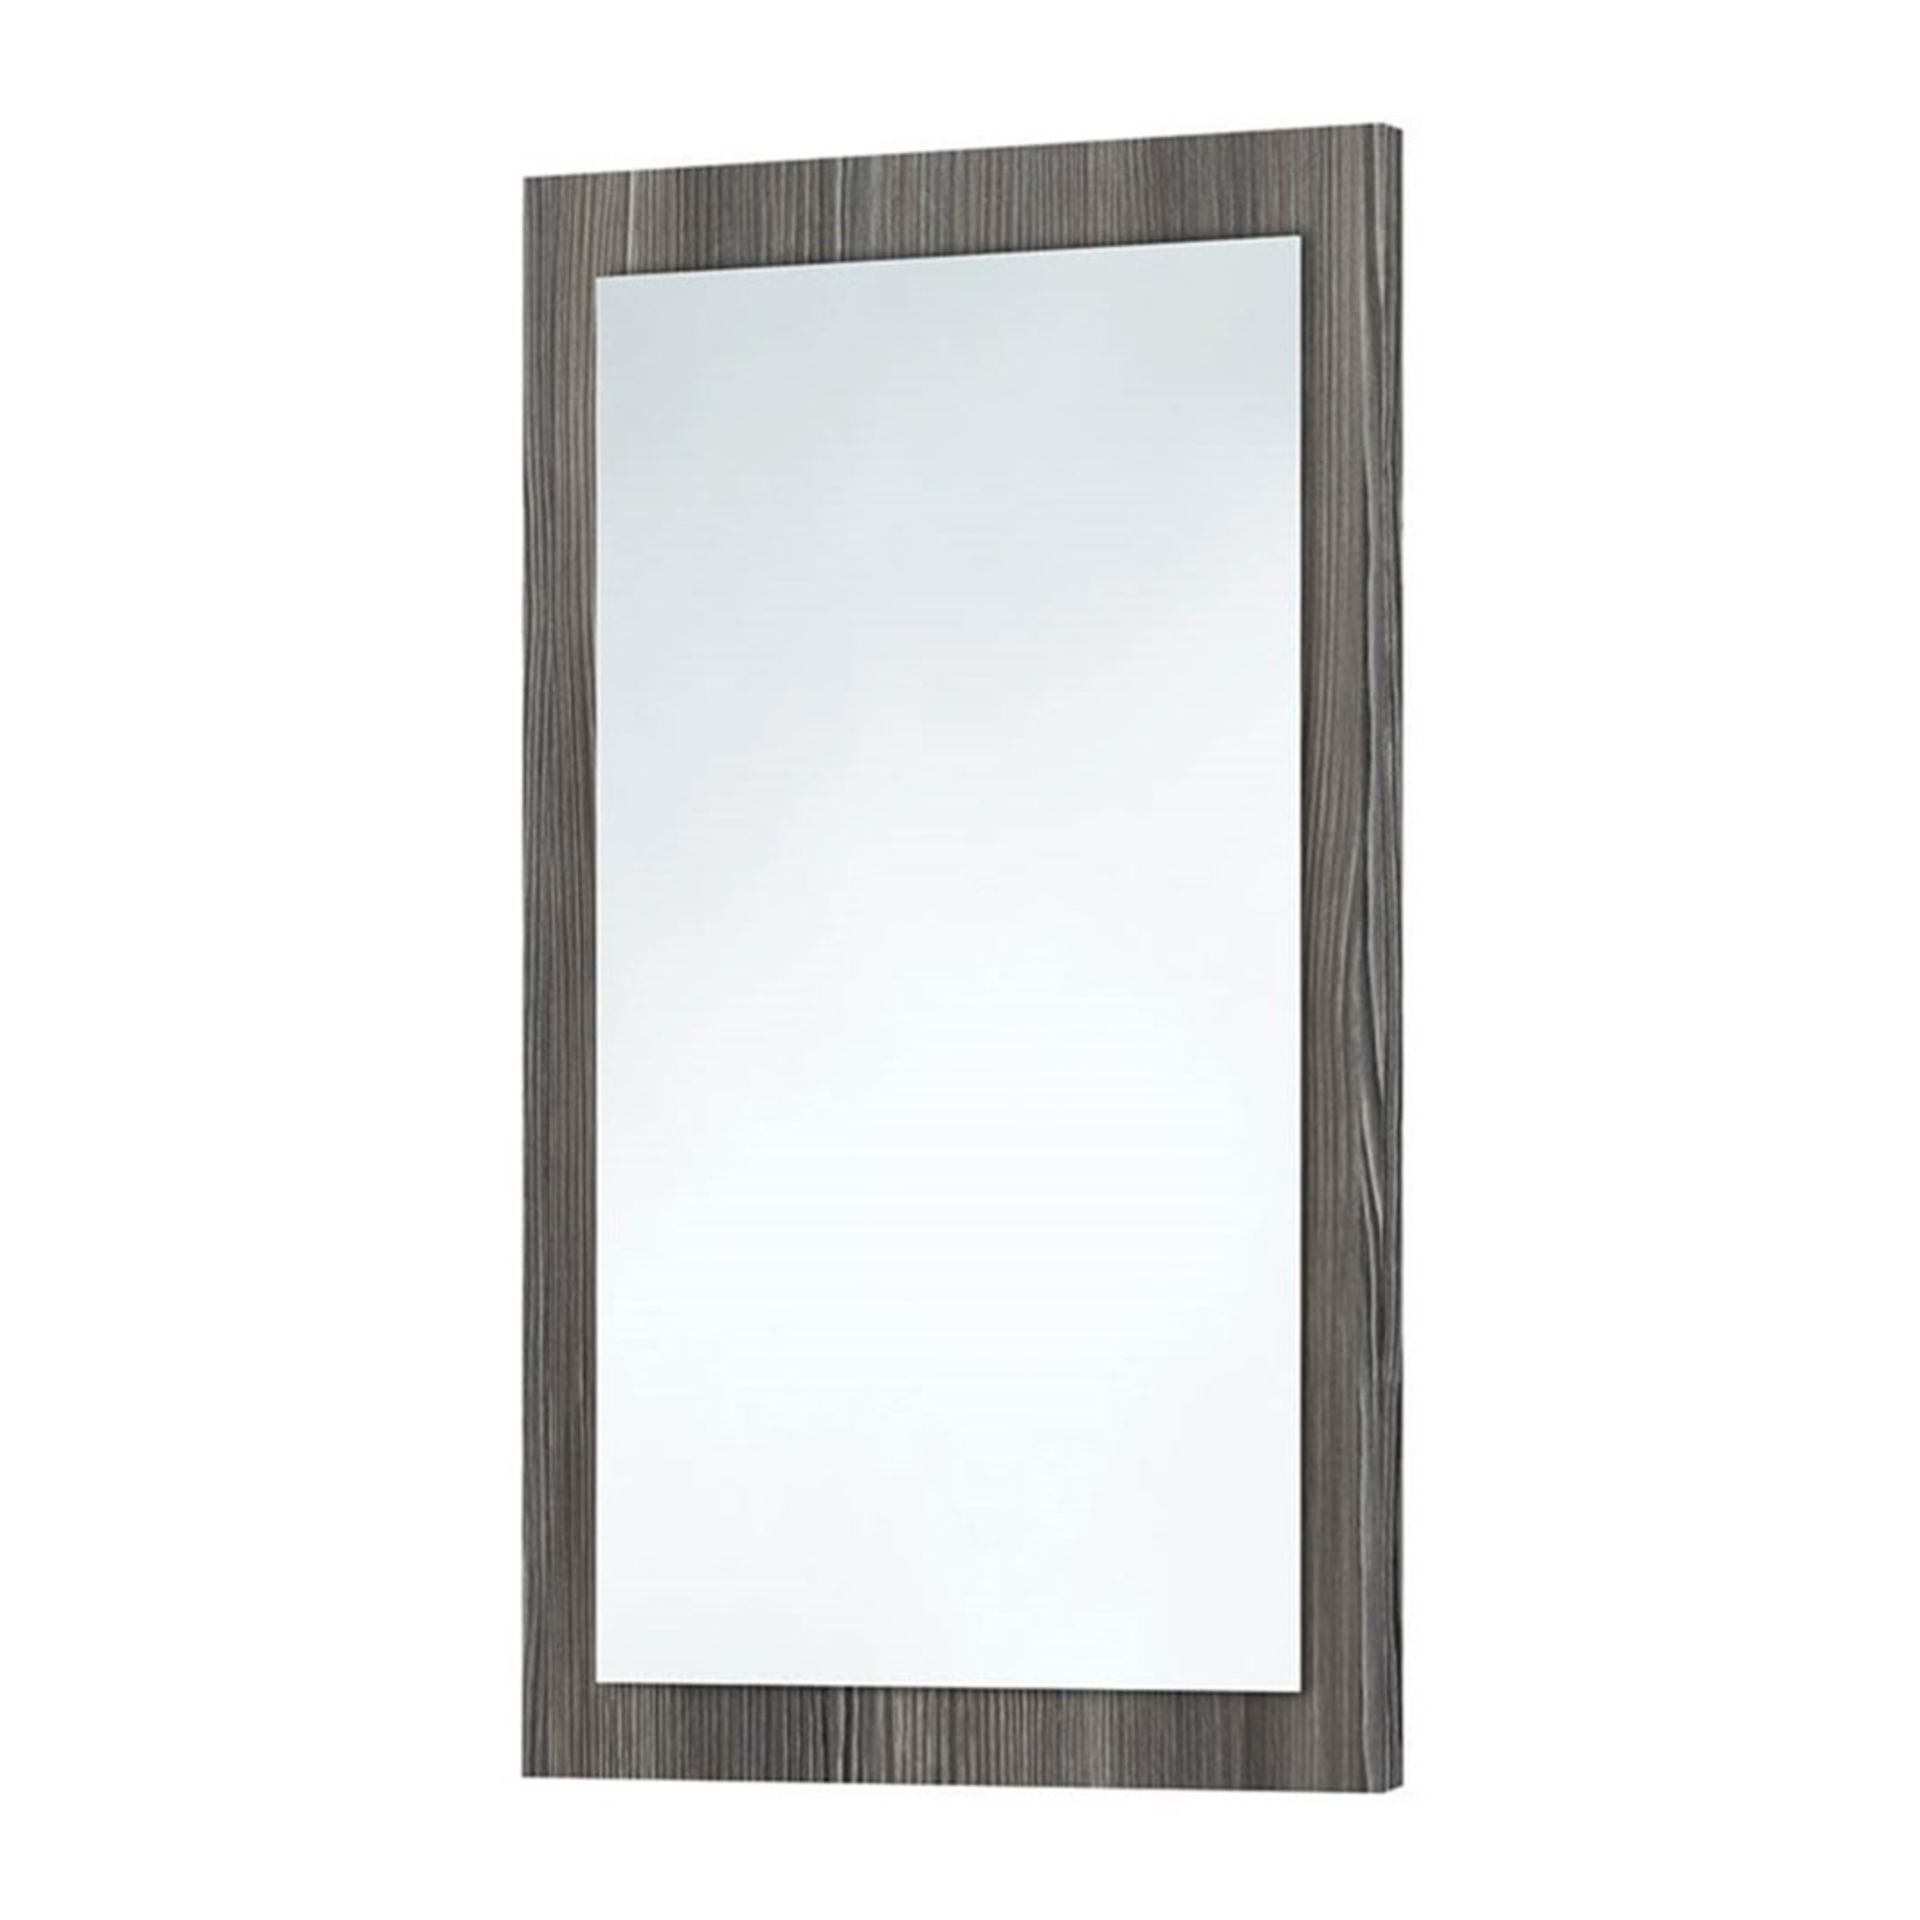 NEW (K106) Harbour Mirror with Avola Grey Frame - 900 x 600mm. RRP £176.49. H:900 x W:600mm P... - Image 2 of 2